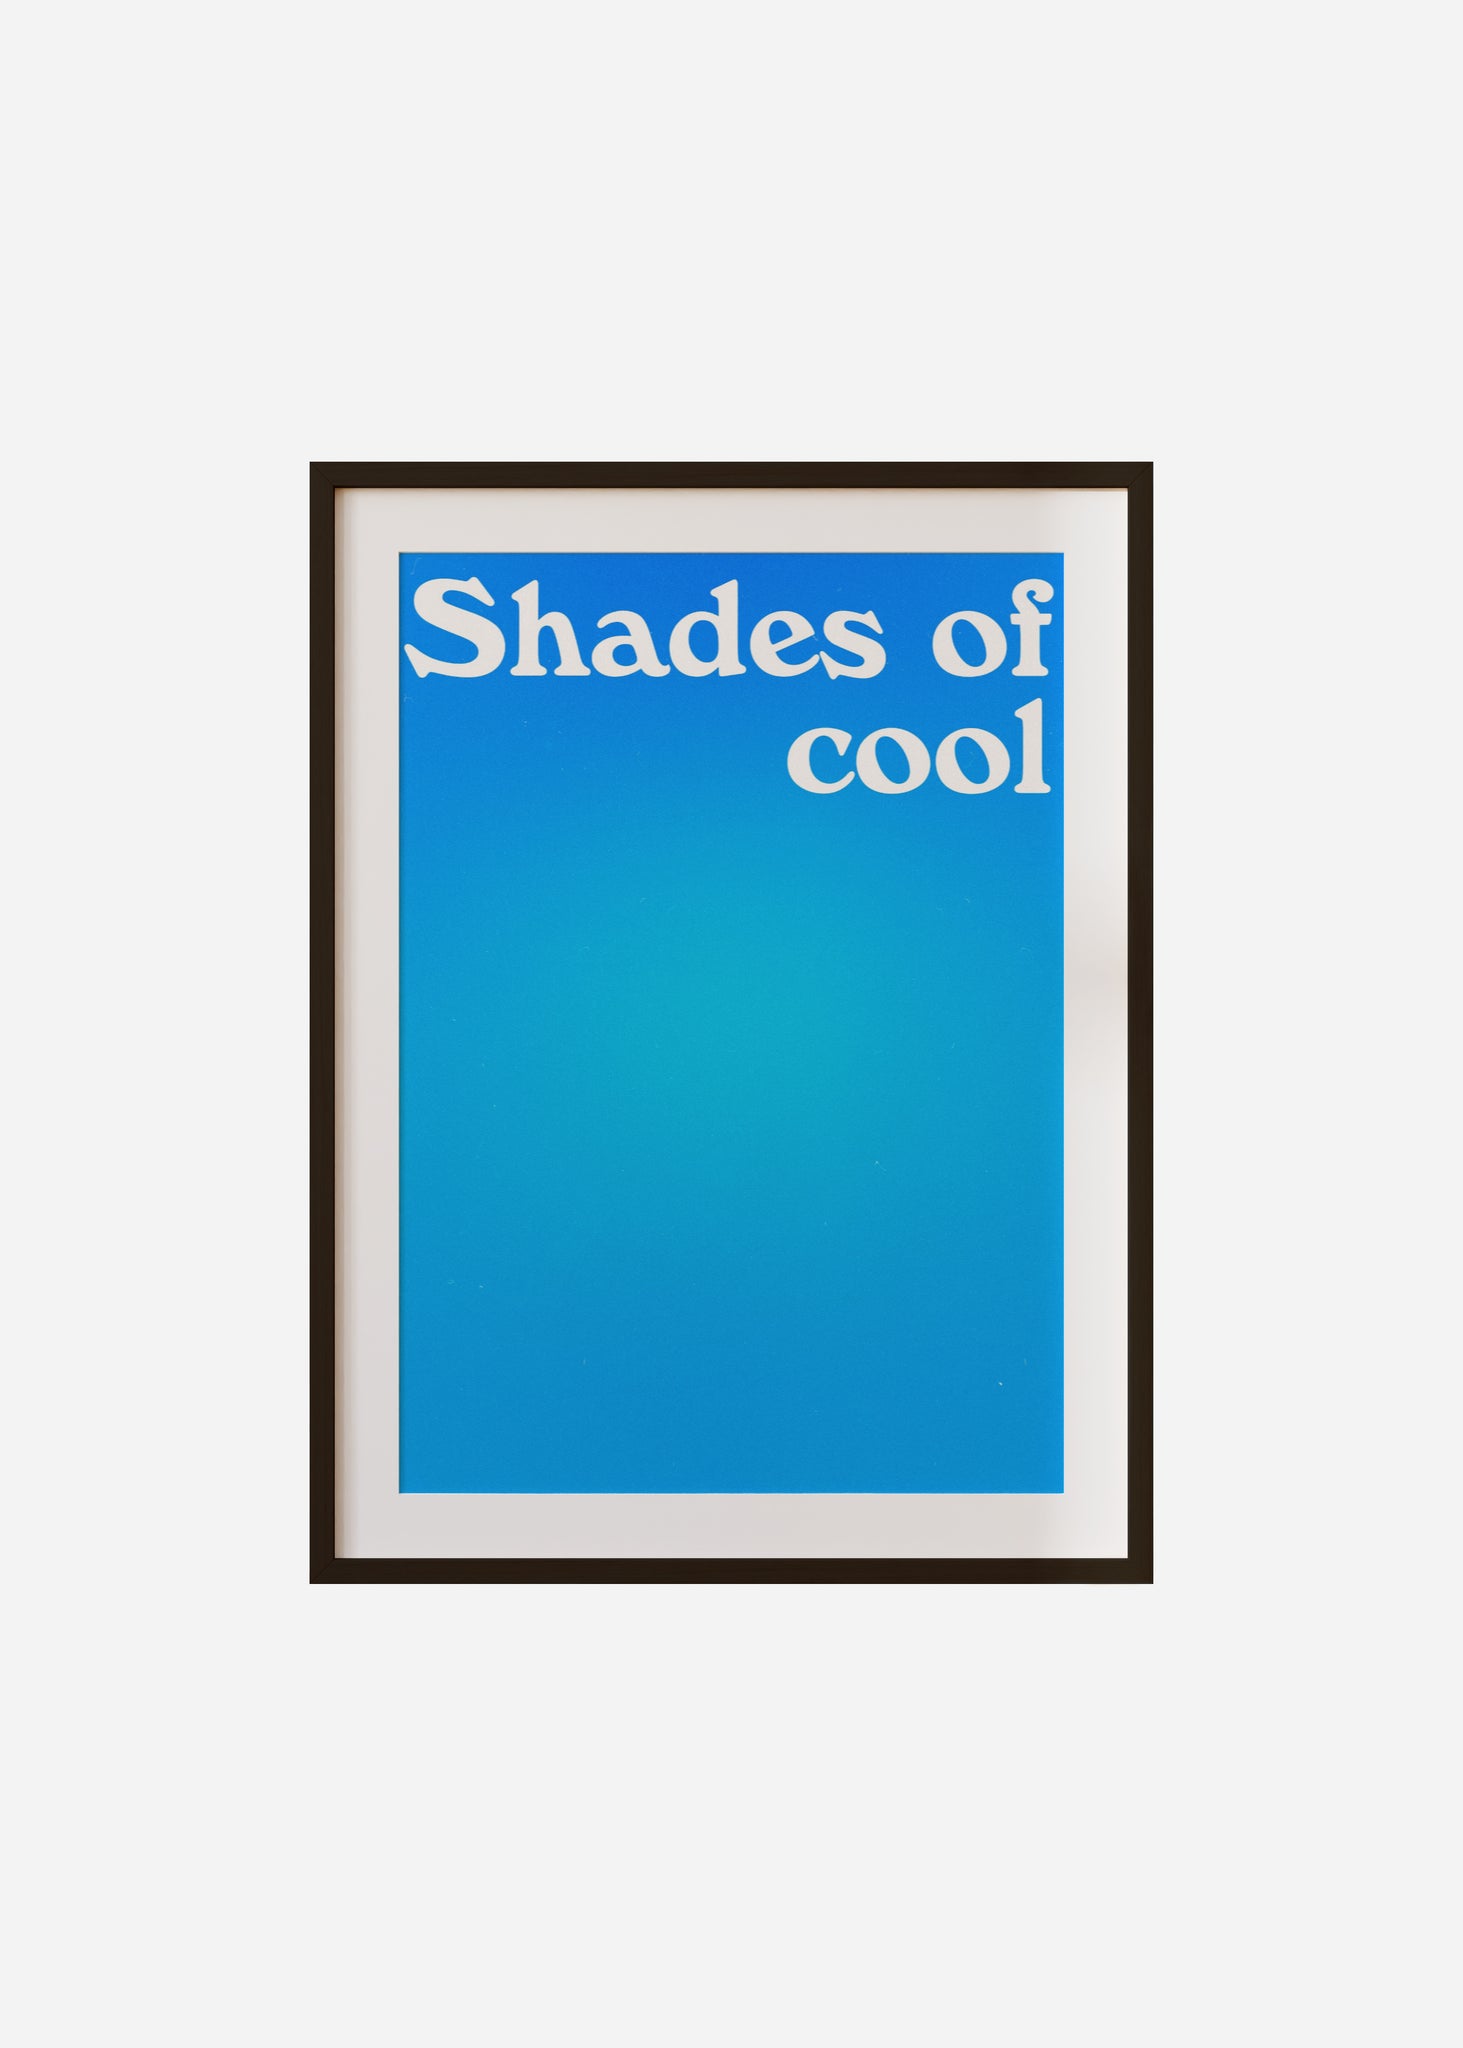 shades of cool Framed & Mounted Print